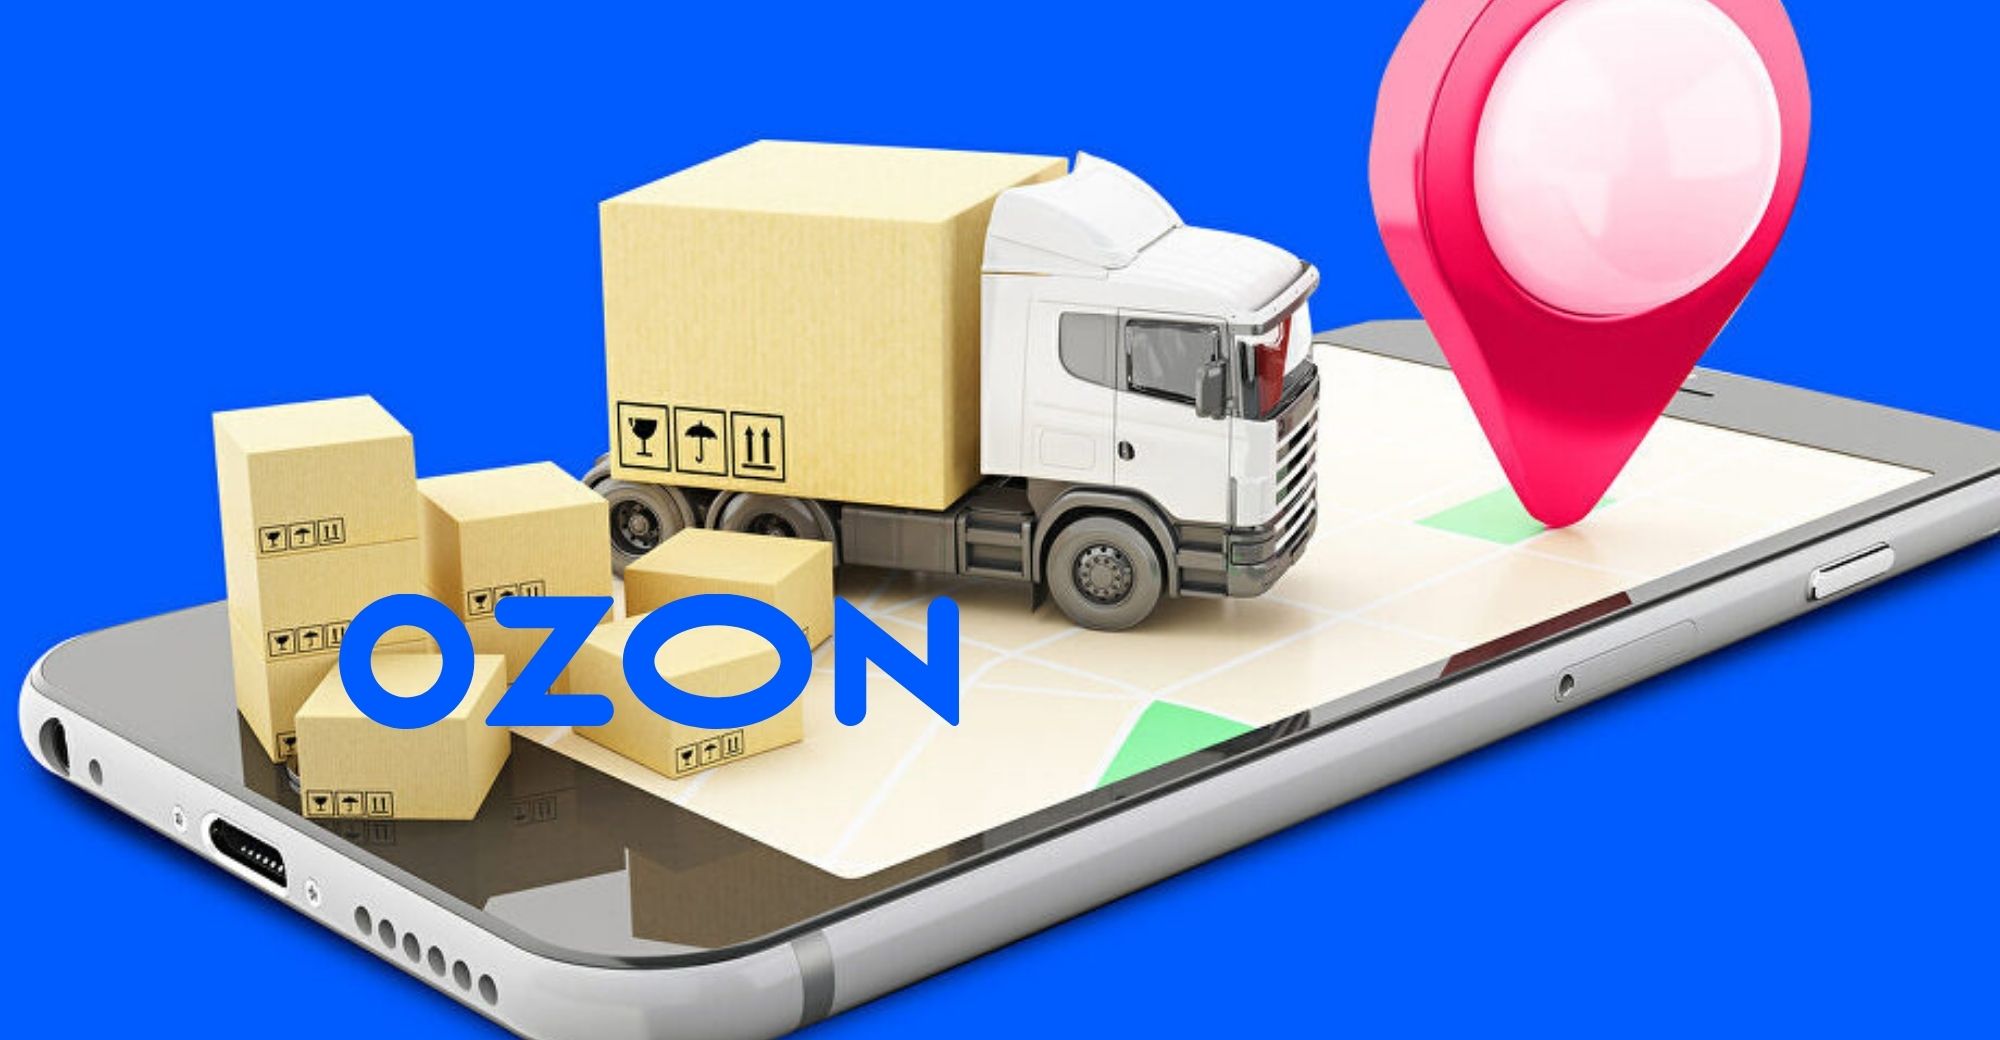 Russian E-Commerce Site Ozon to Open Shenzhen Office for Attracting Chinese Merchants